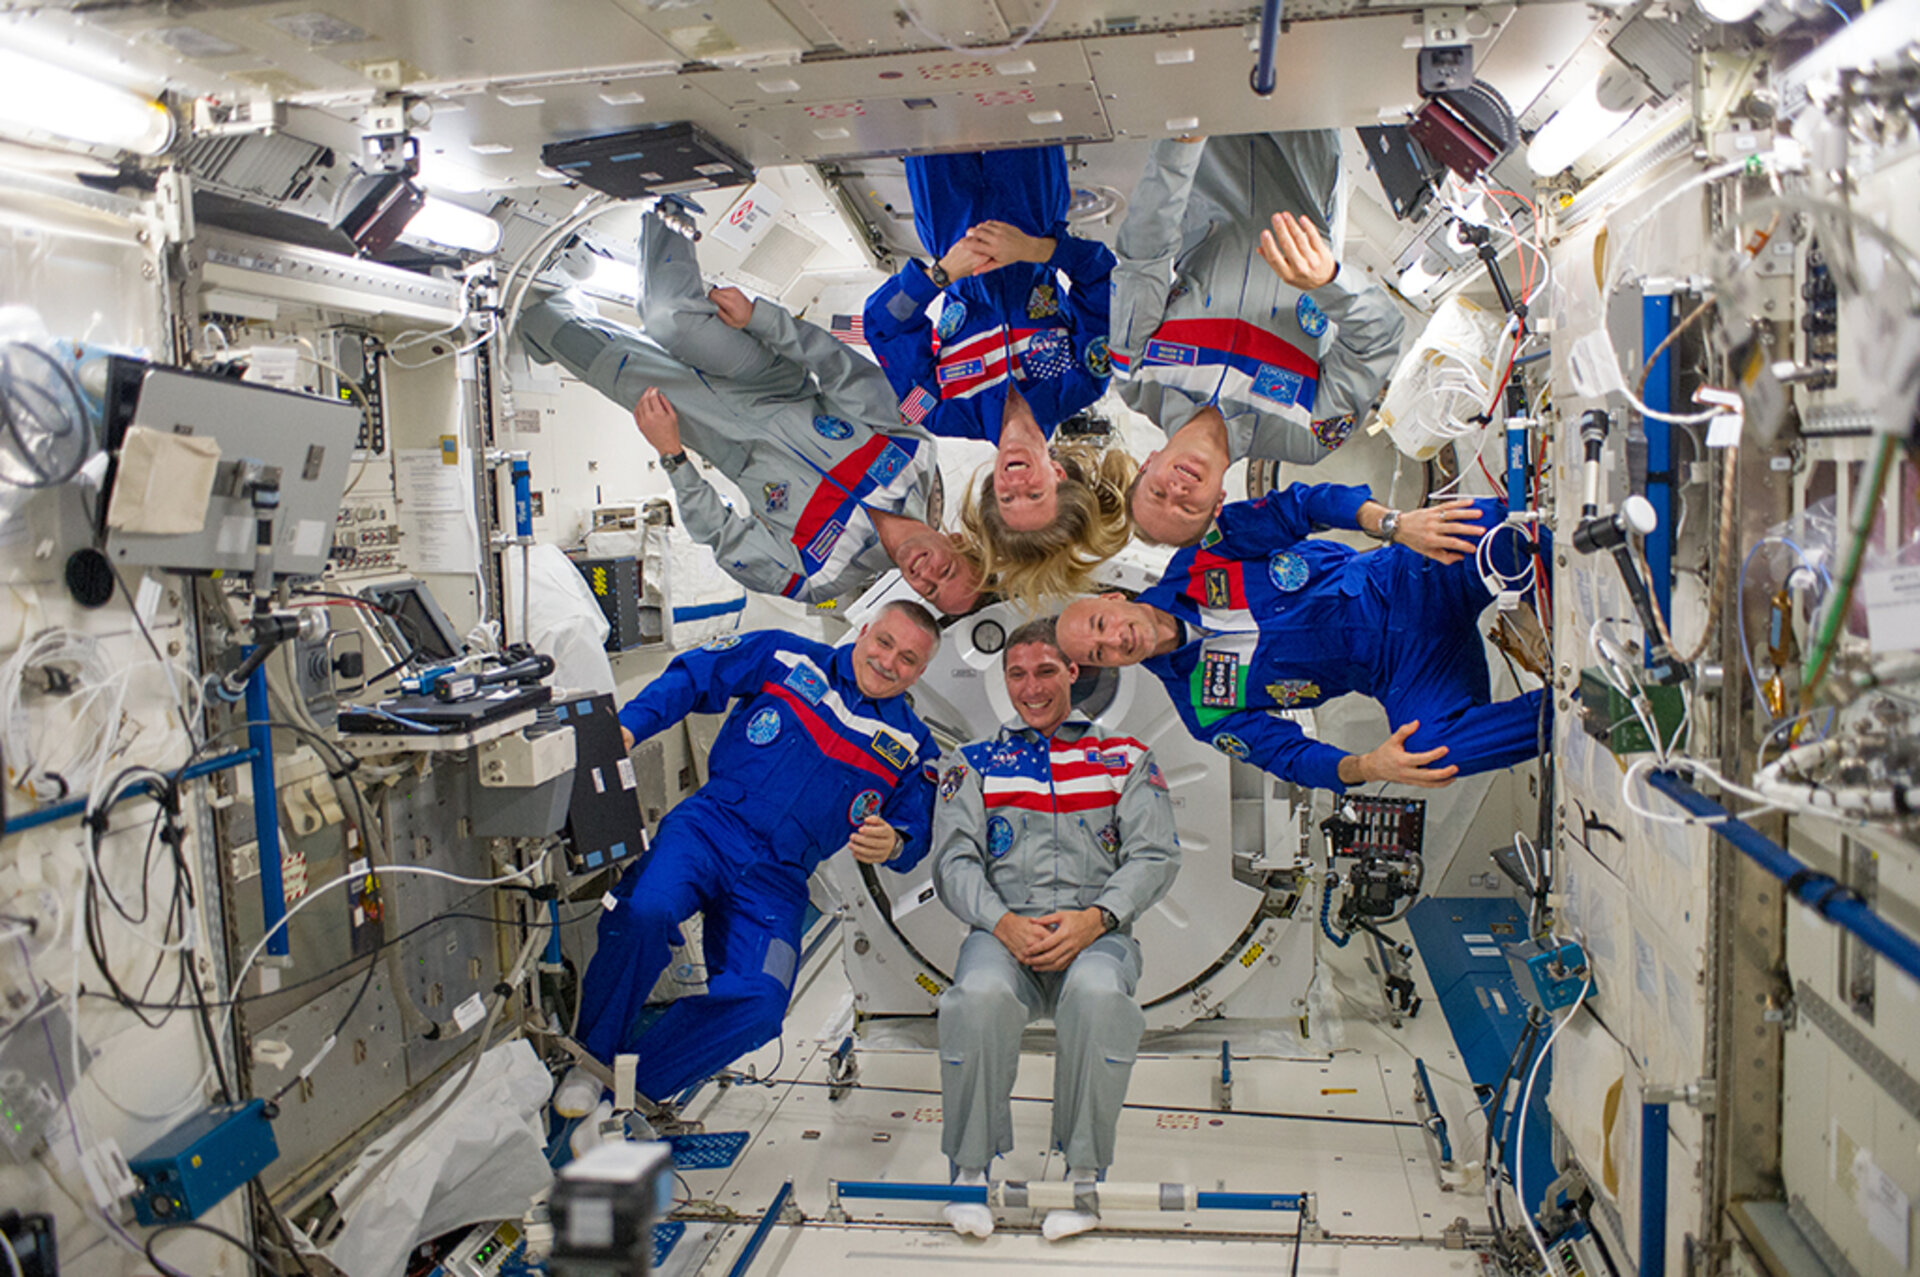 ISS Expedition 37 crew portrait inside Kibo